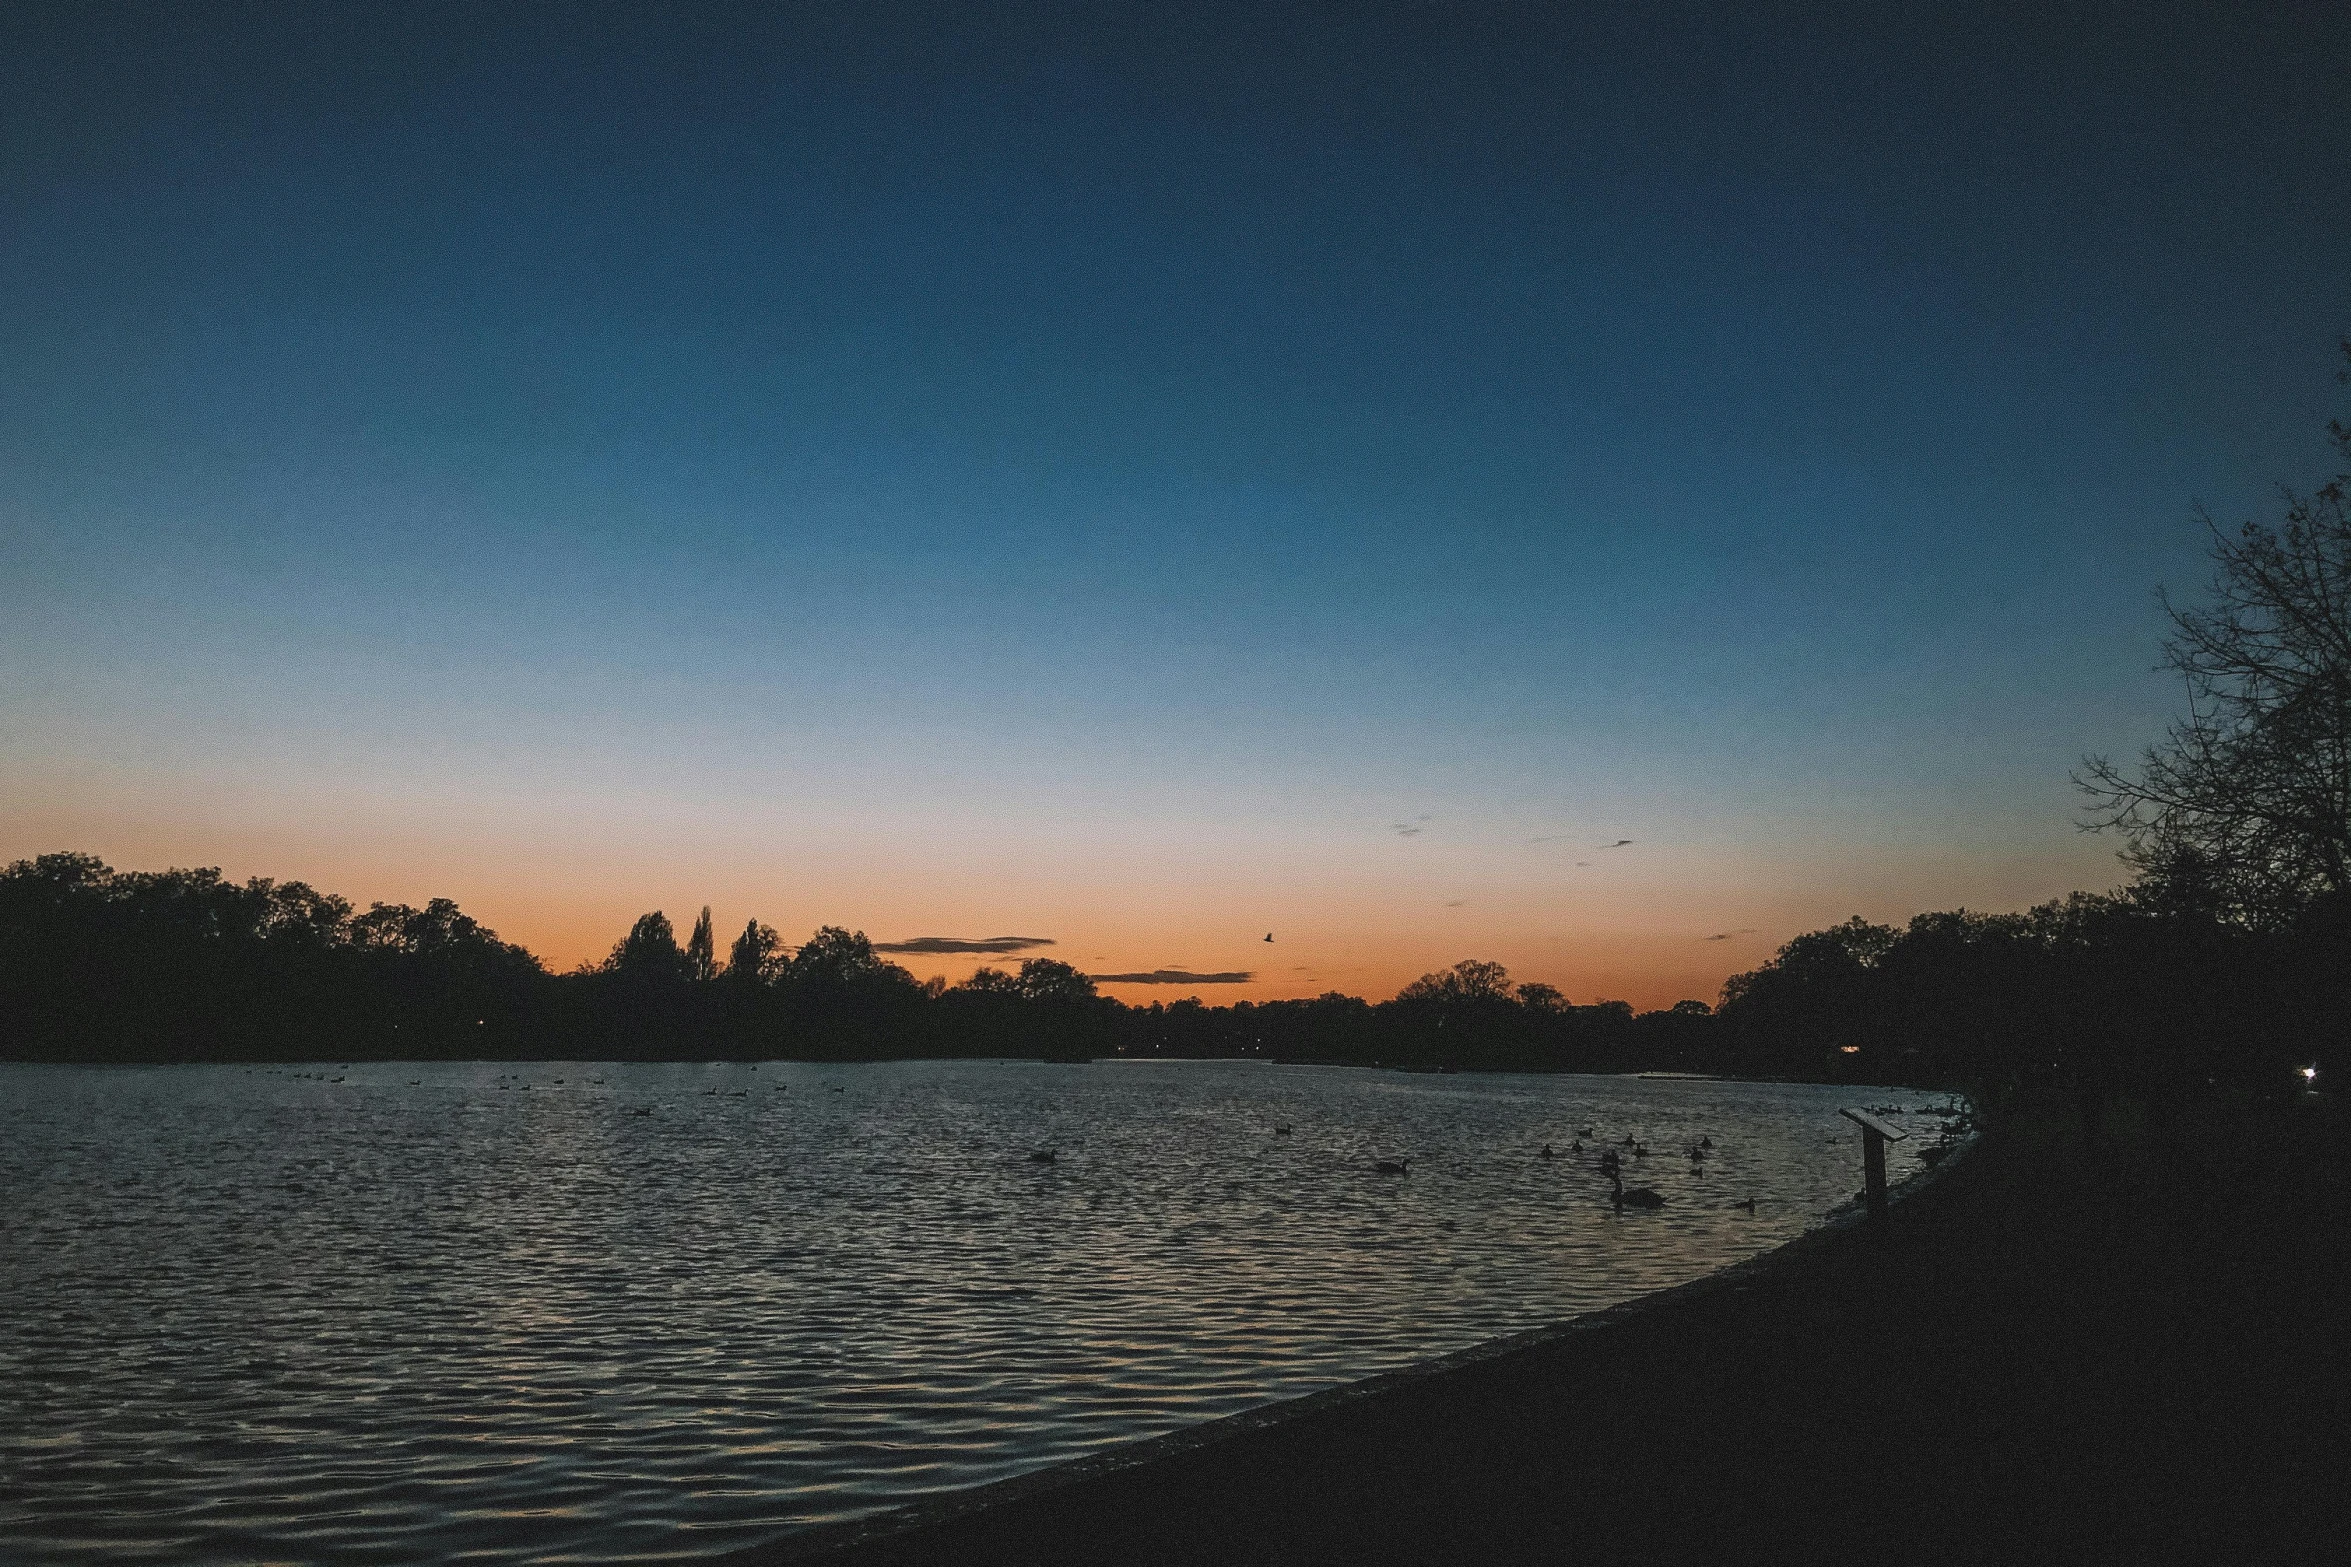 a lake filled with lots of water next to a forest, an album cover, unsplash contest winner, aestheticism, twilight skyline, mystical kew gardens, there is midnight sunset, soft evening lighting